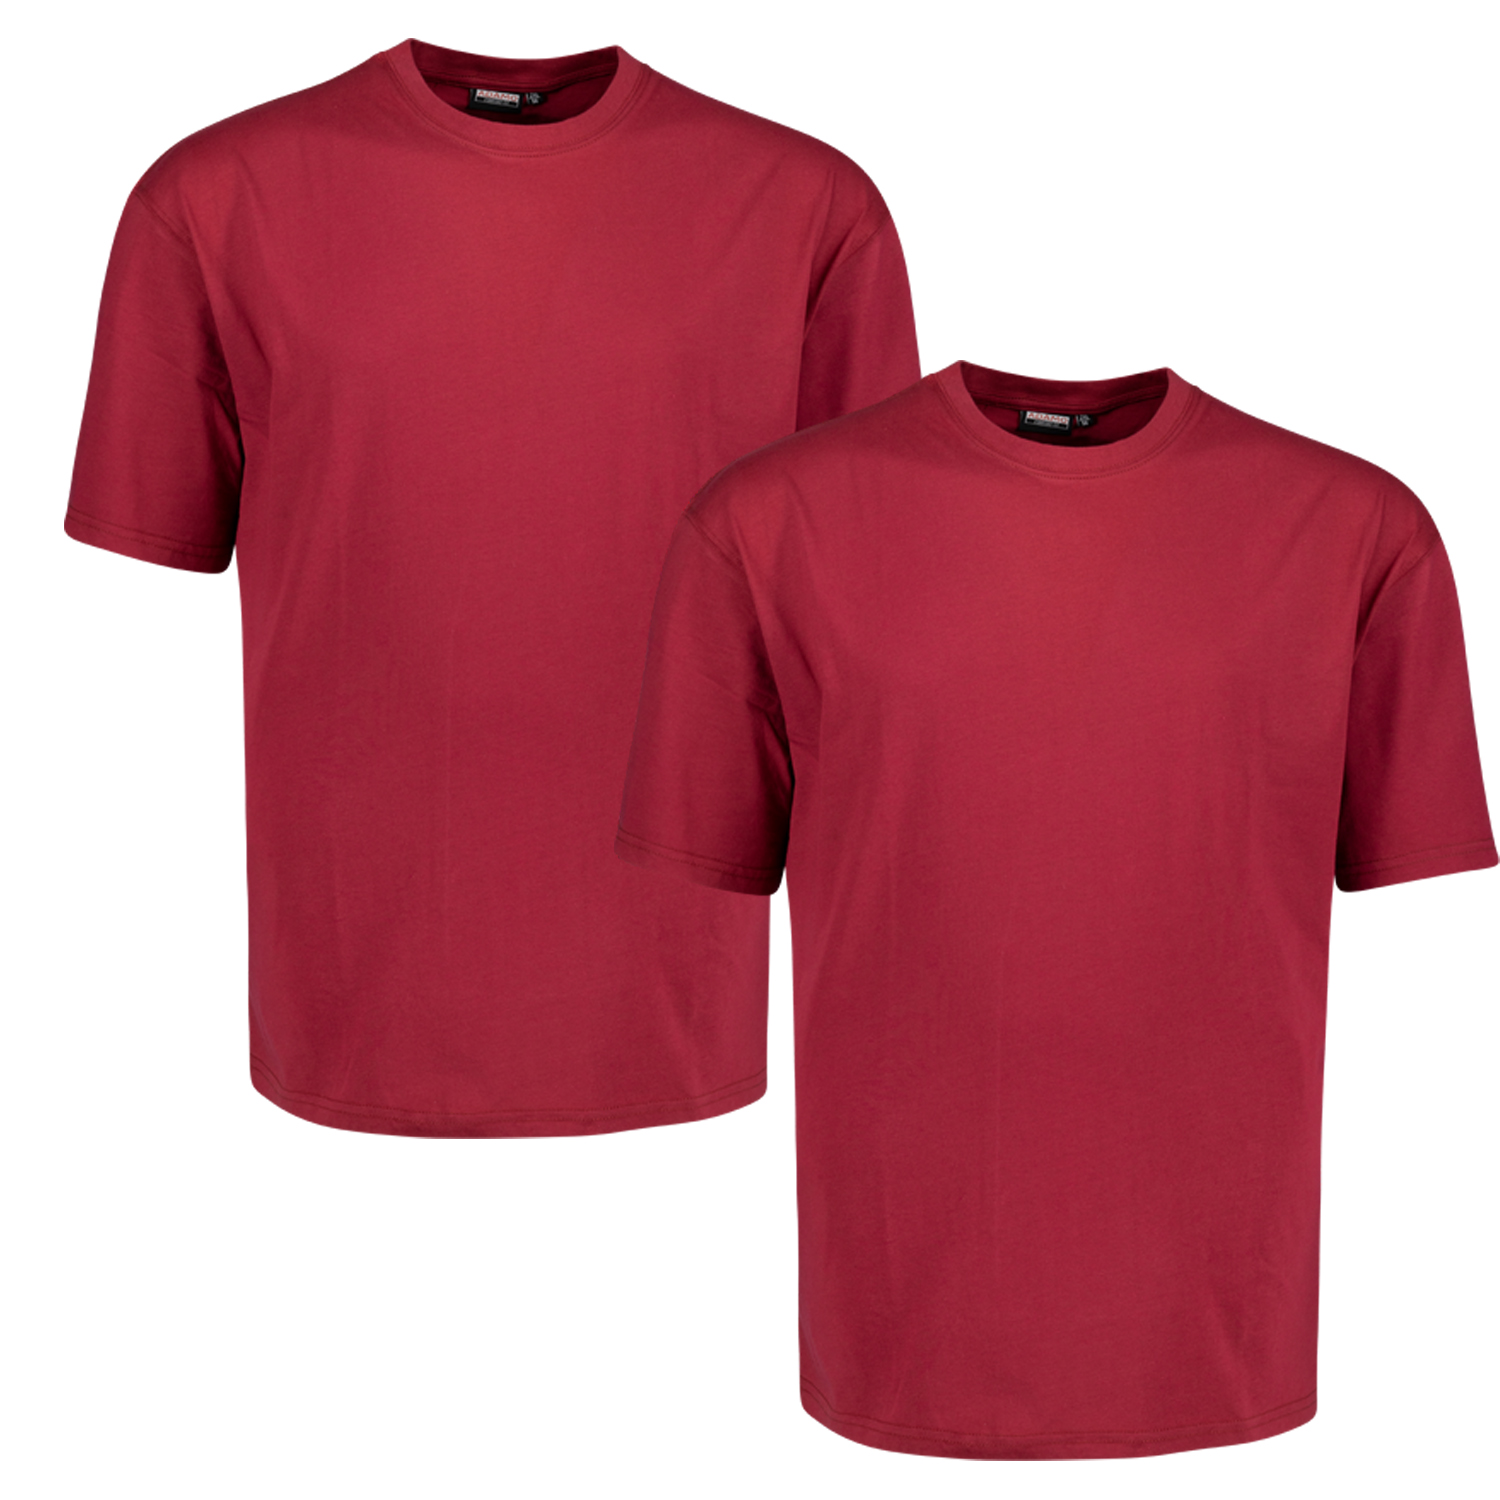 Double pack ruby MARLON t-shirt COMFORT FIT  by ADAMO up to kingsize 12XL